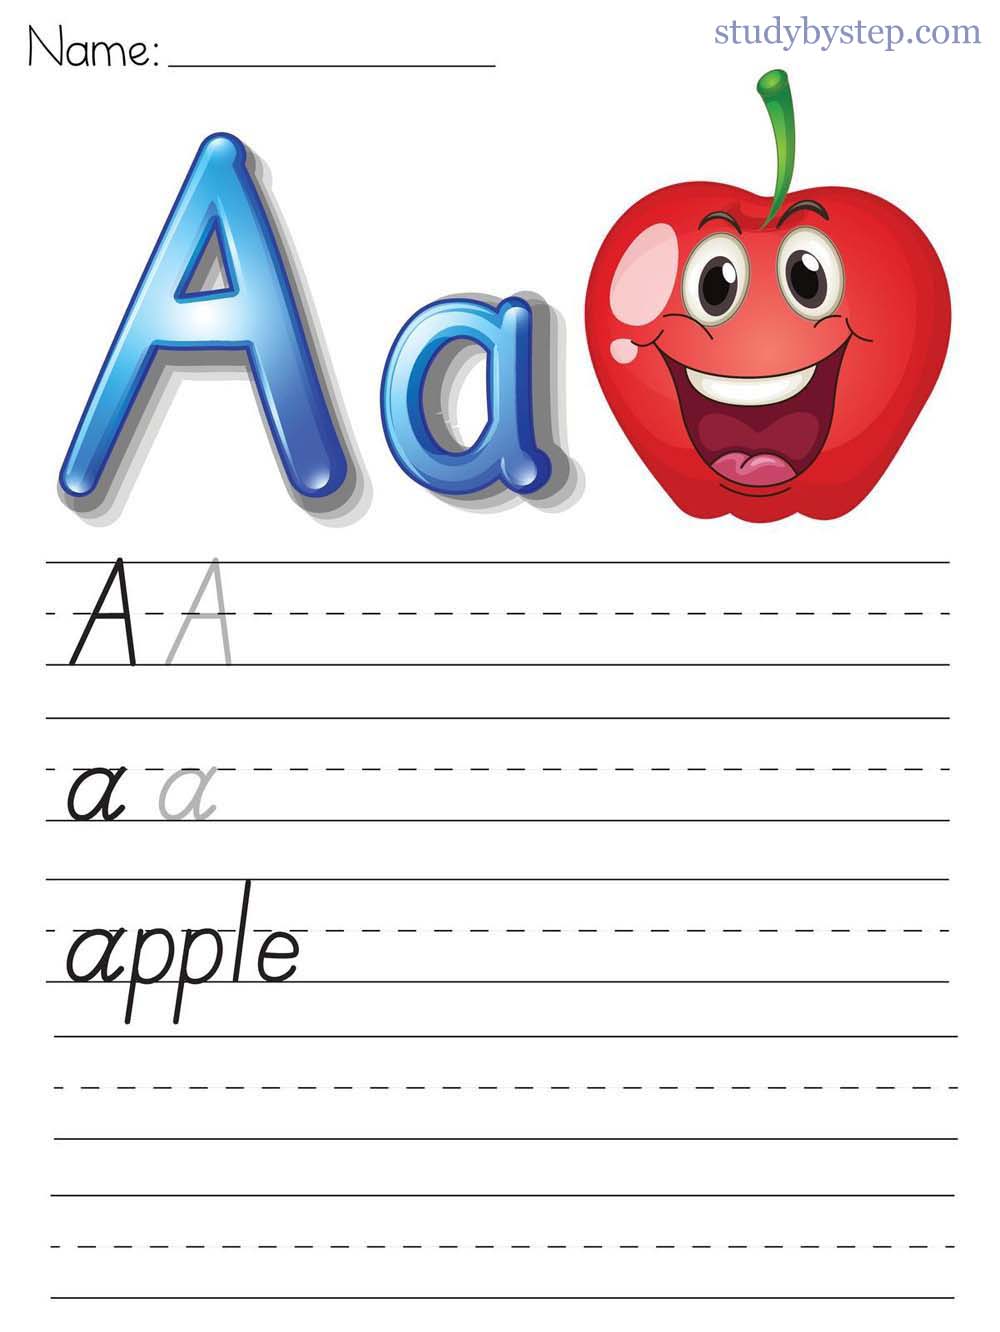 Picture Worksheet 3 - Handwriting Practice of Capital A and Small a